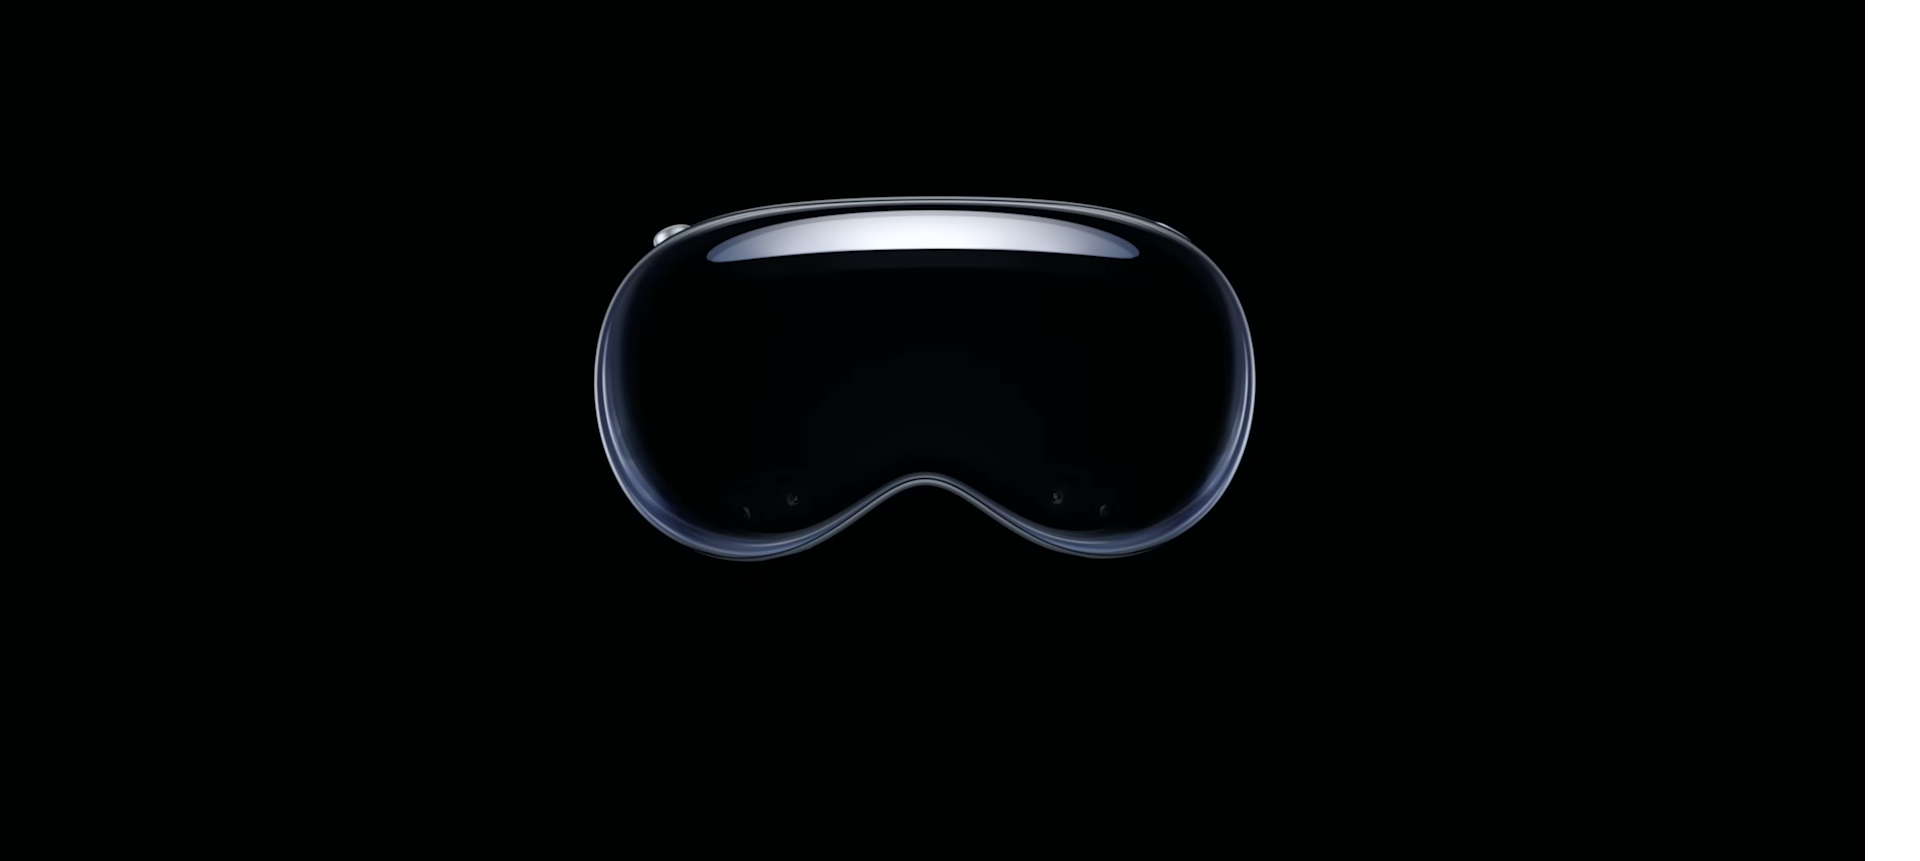 Apple is joining the VR battle with the Vision Pro